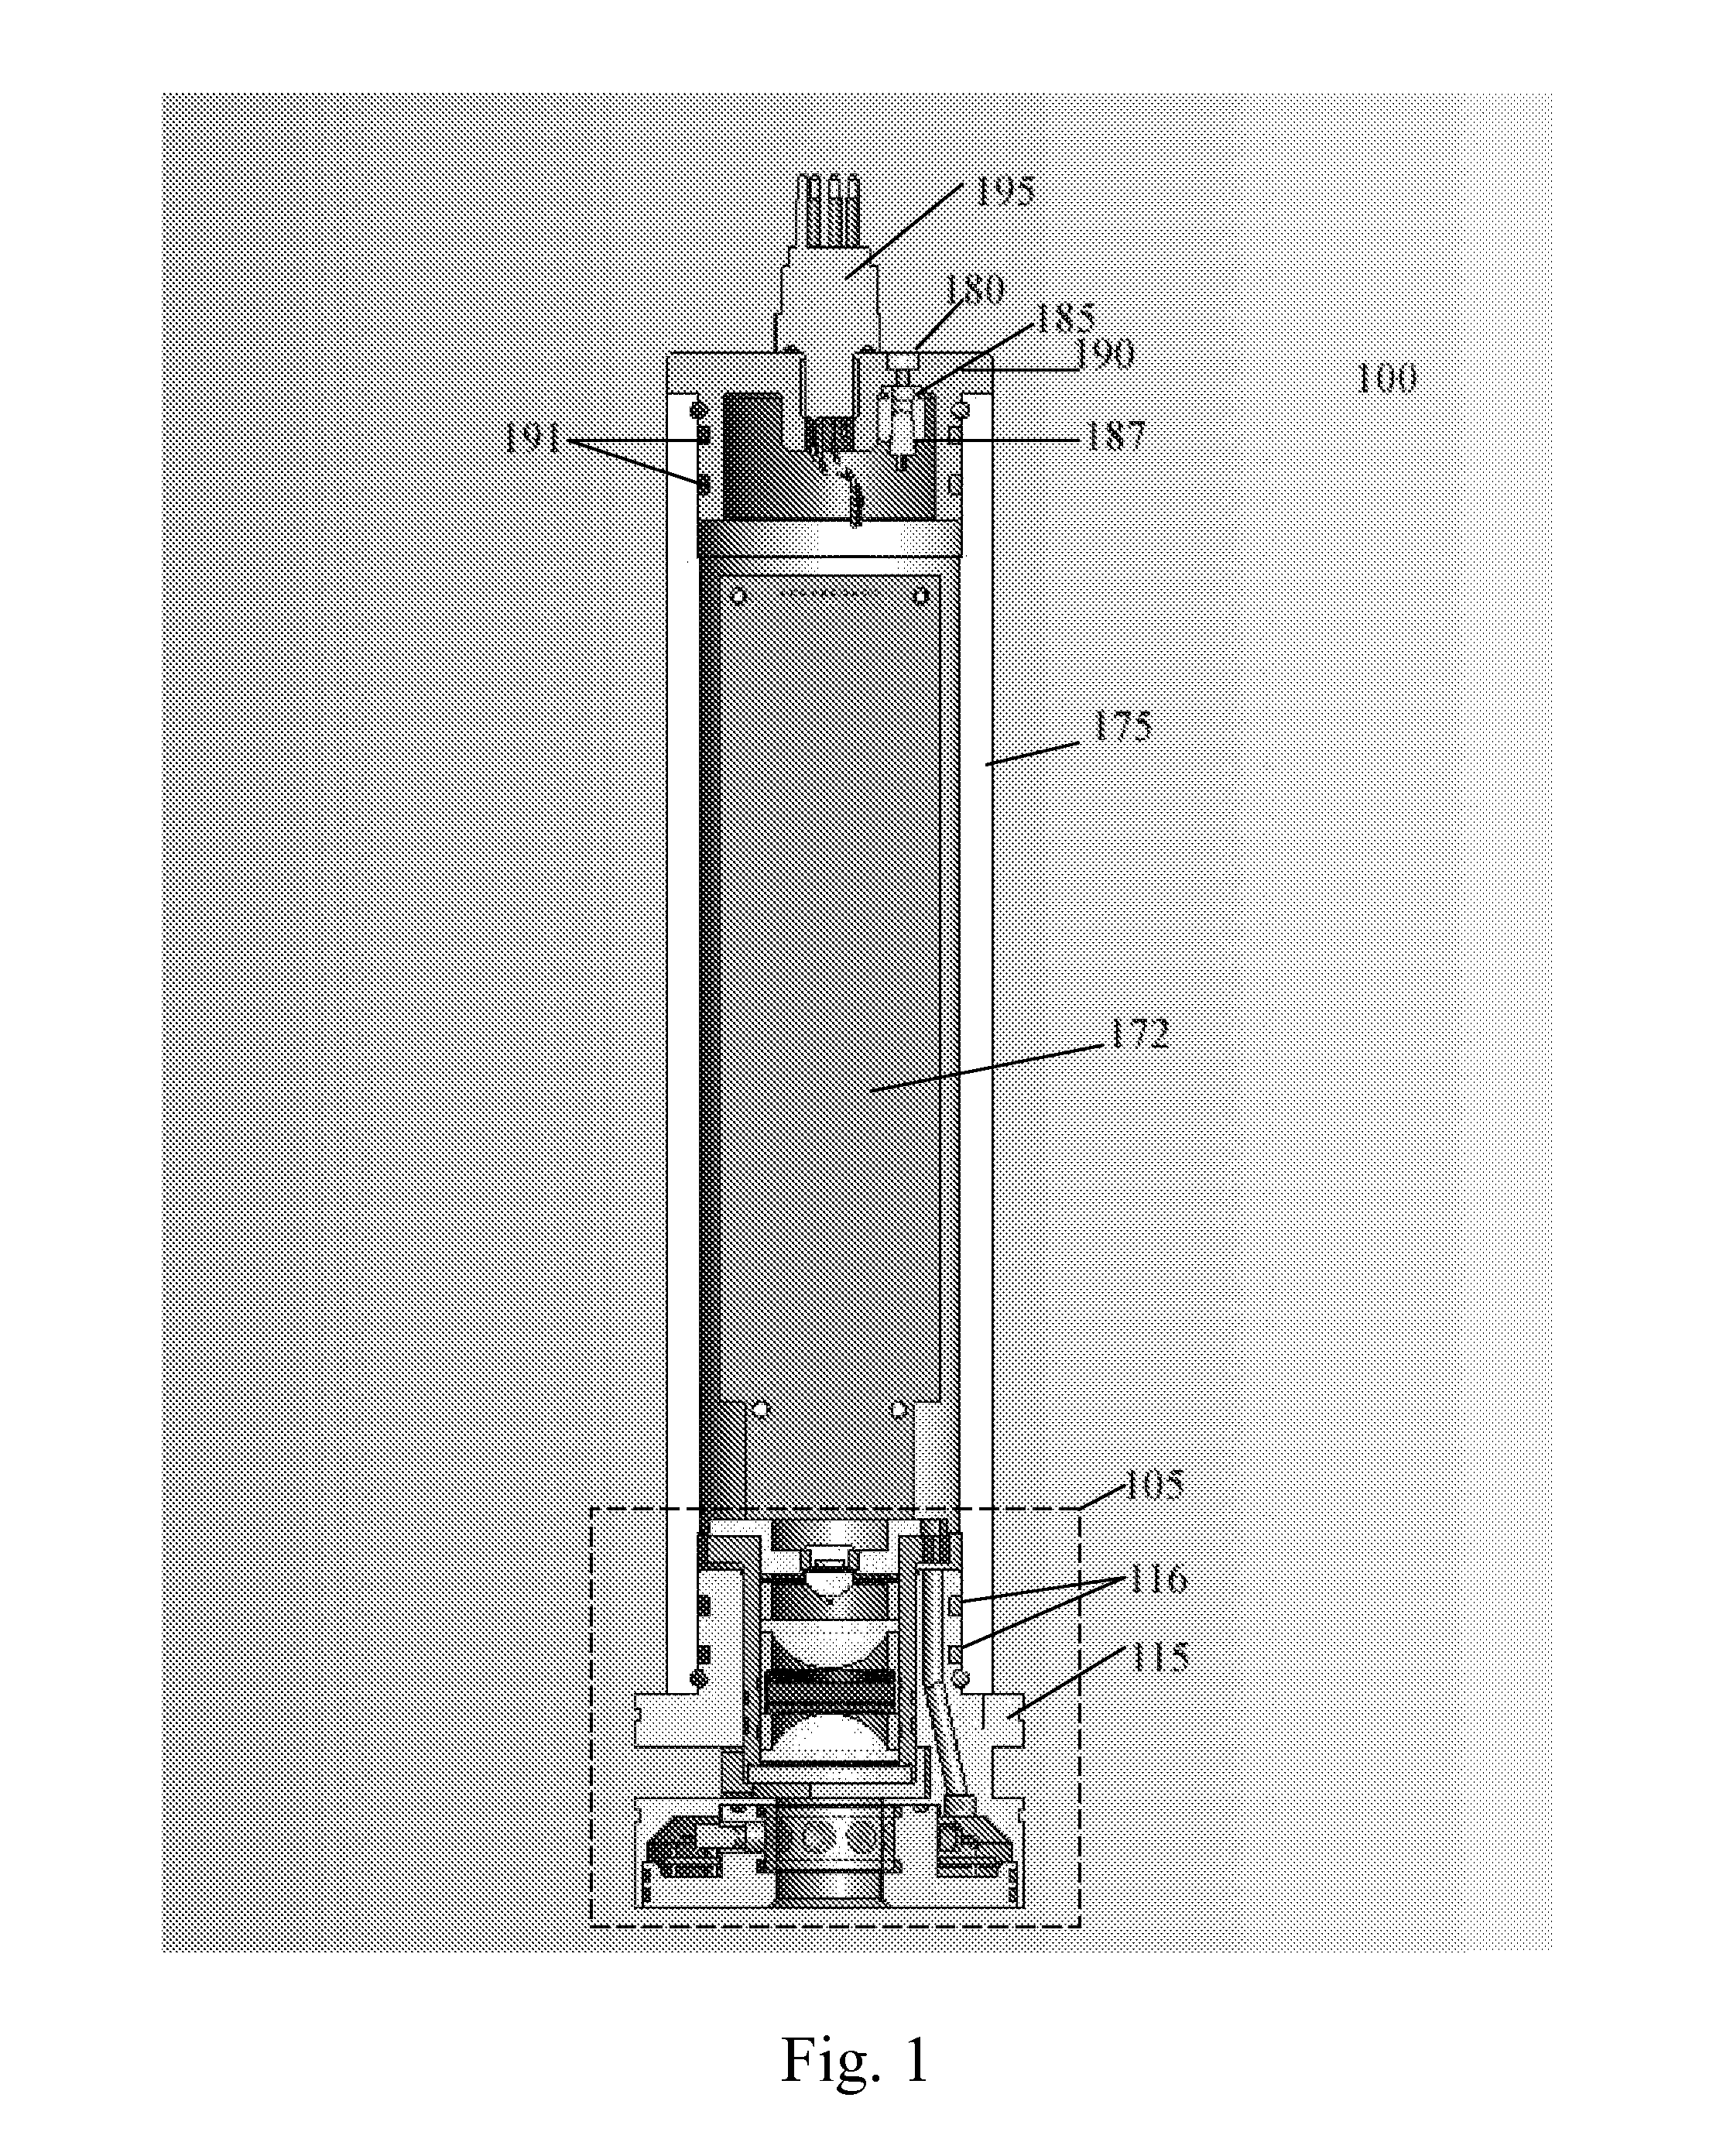 Submersible apparatus for measuring active fluorescence